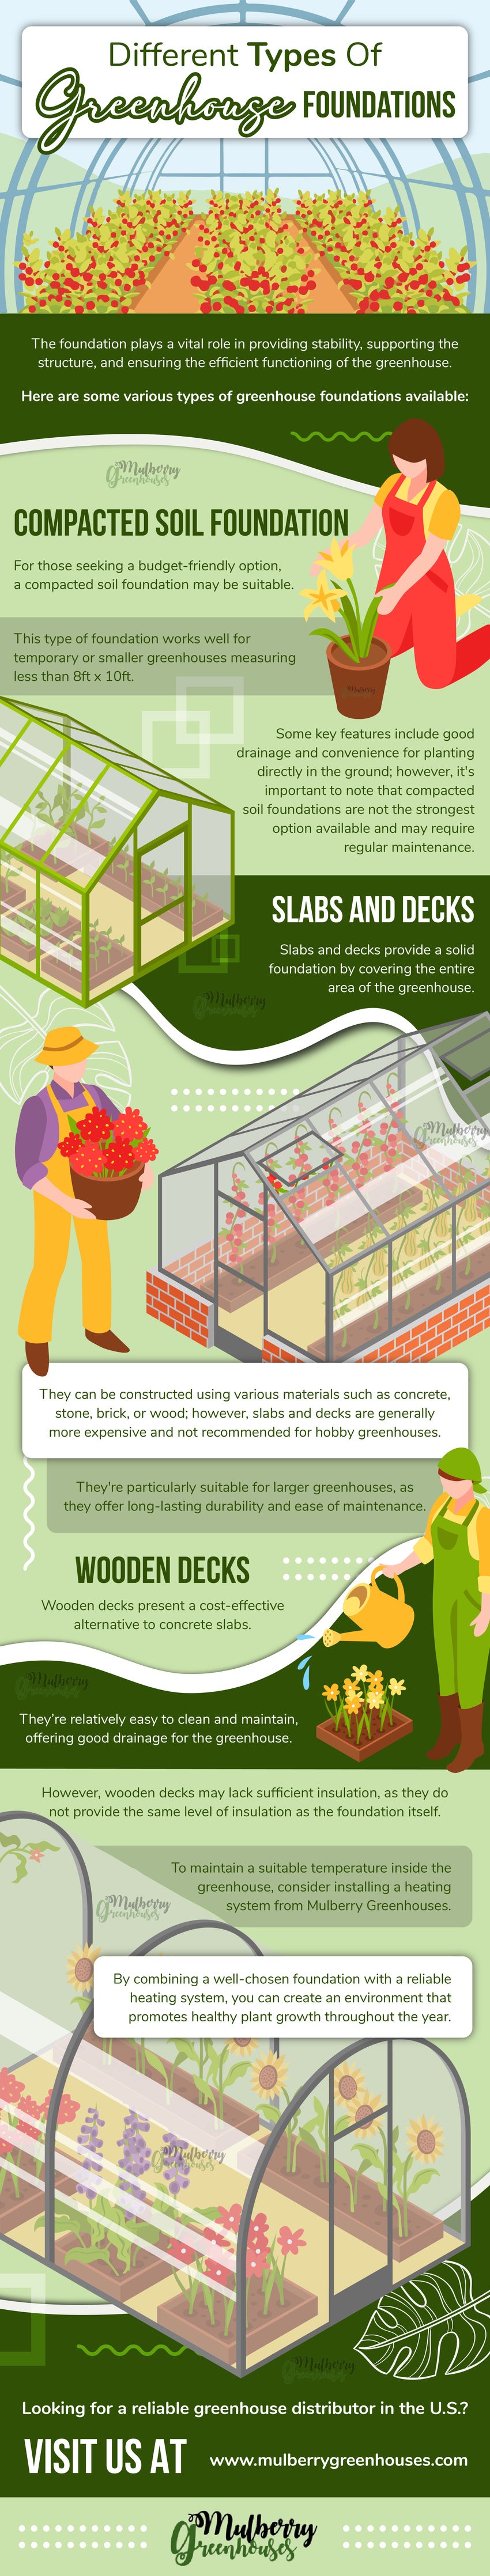 Different Types of Greenhouse Foundations - Infograph